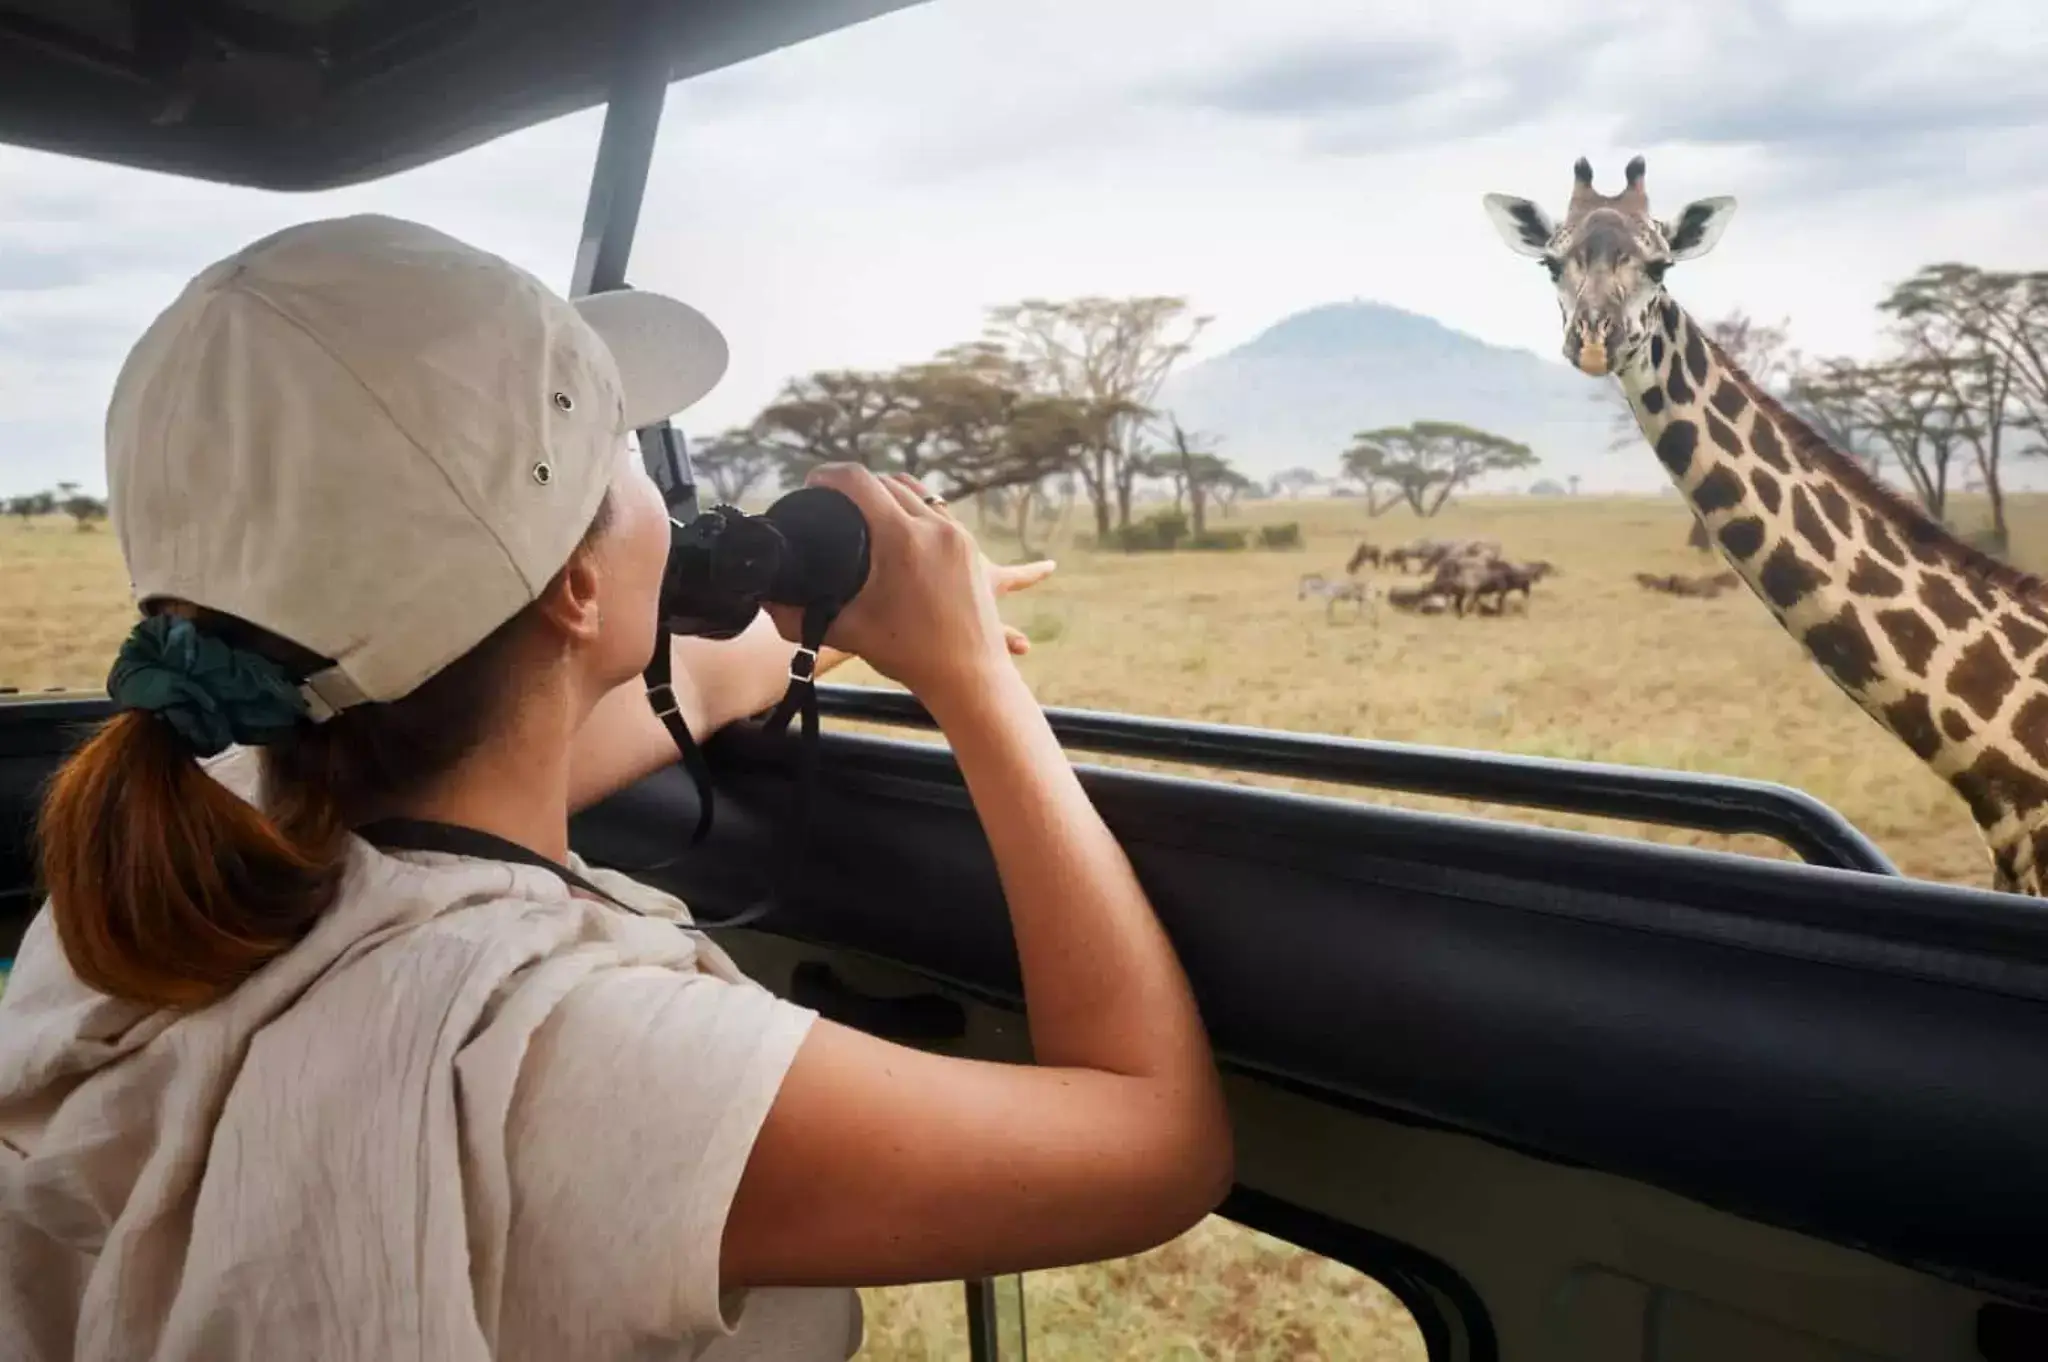 A female traveller capturing an image of a giraffe from a safari vehicle